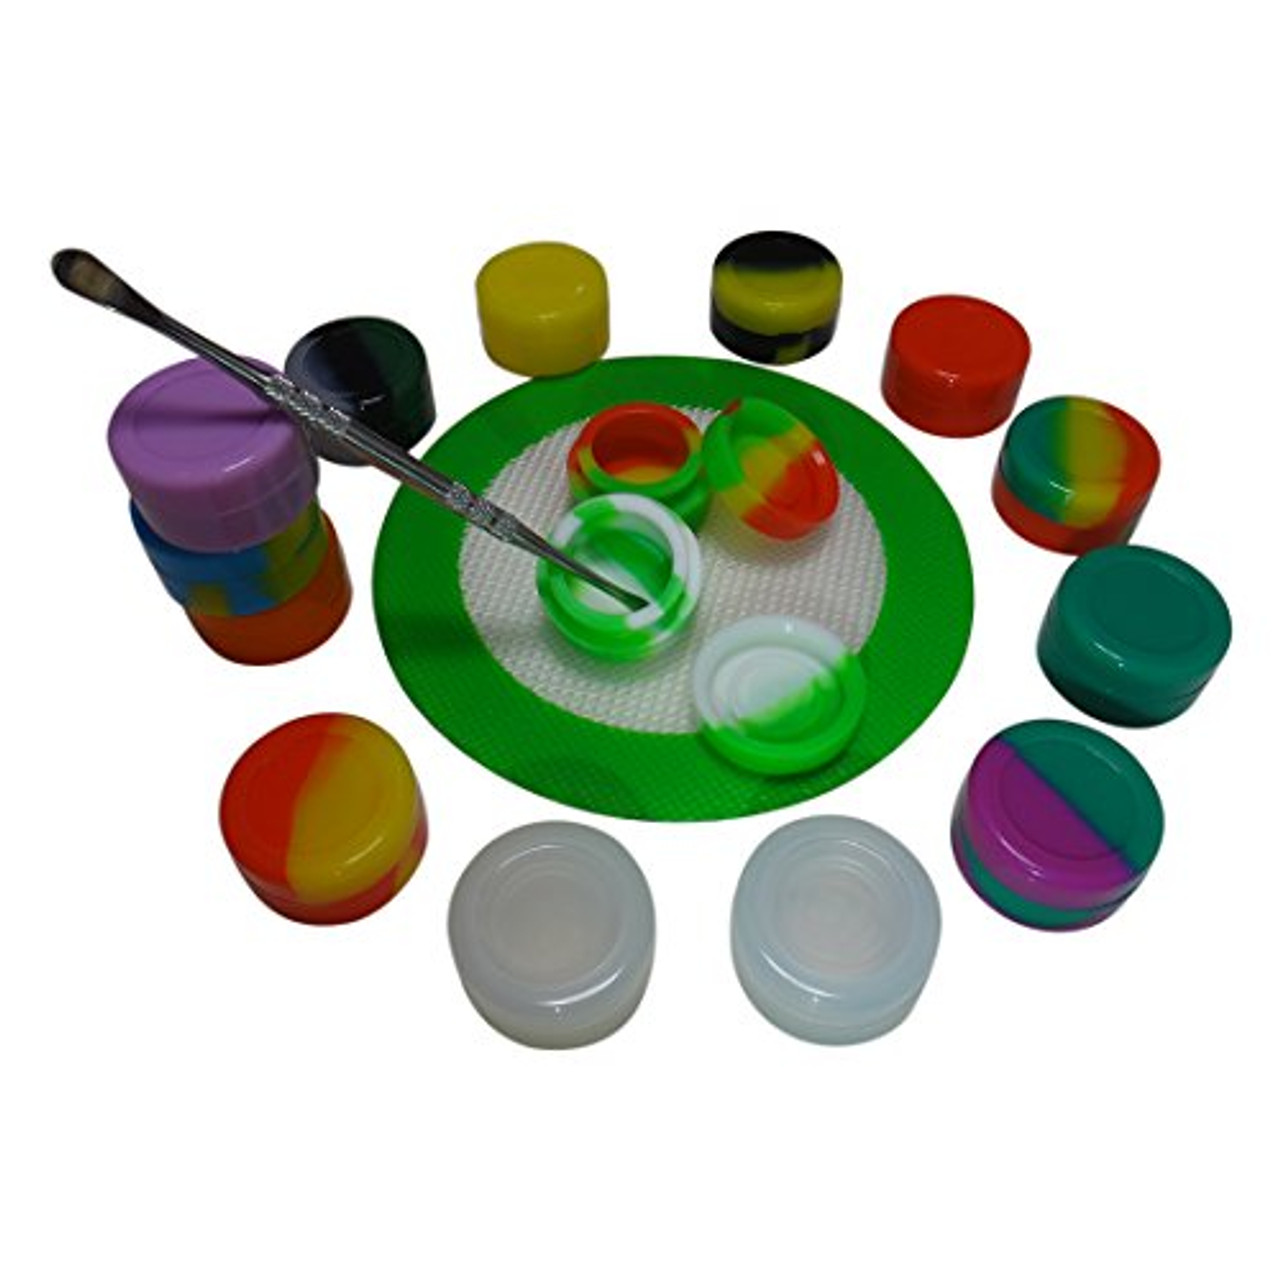 Custom Wax Containers - 7 ml Silicone Pucks - Assorted